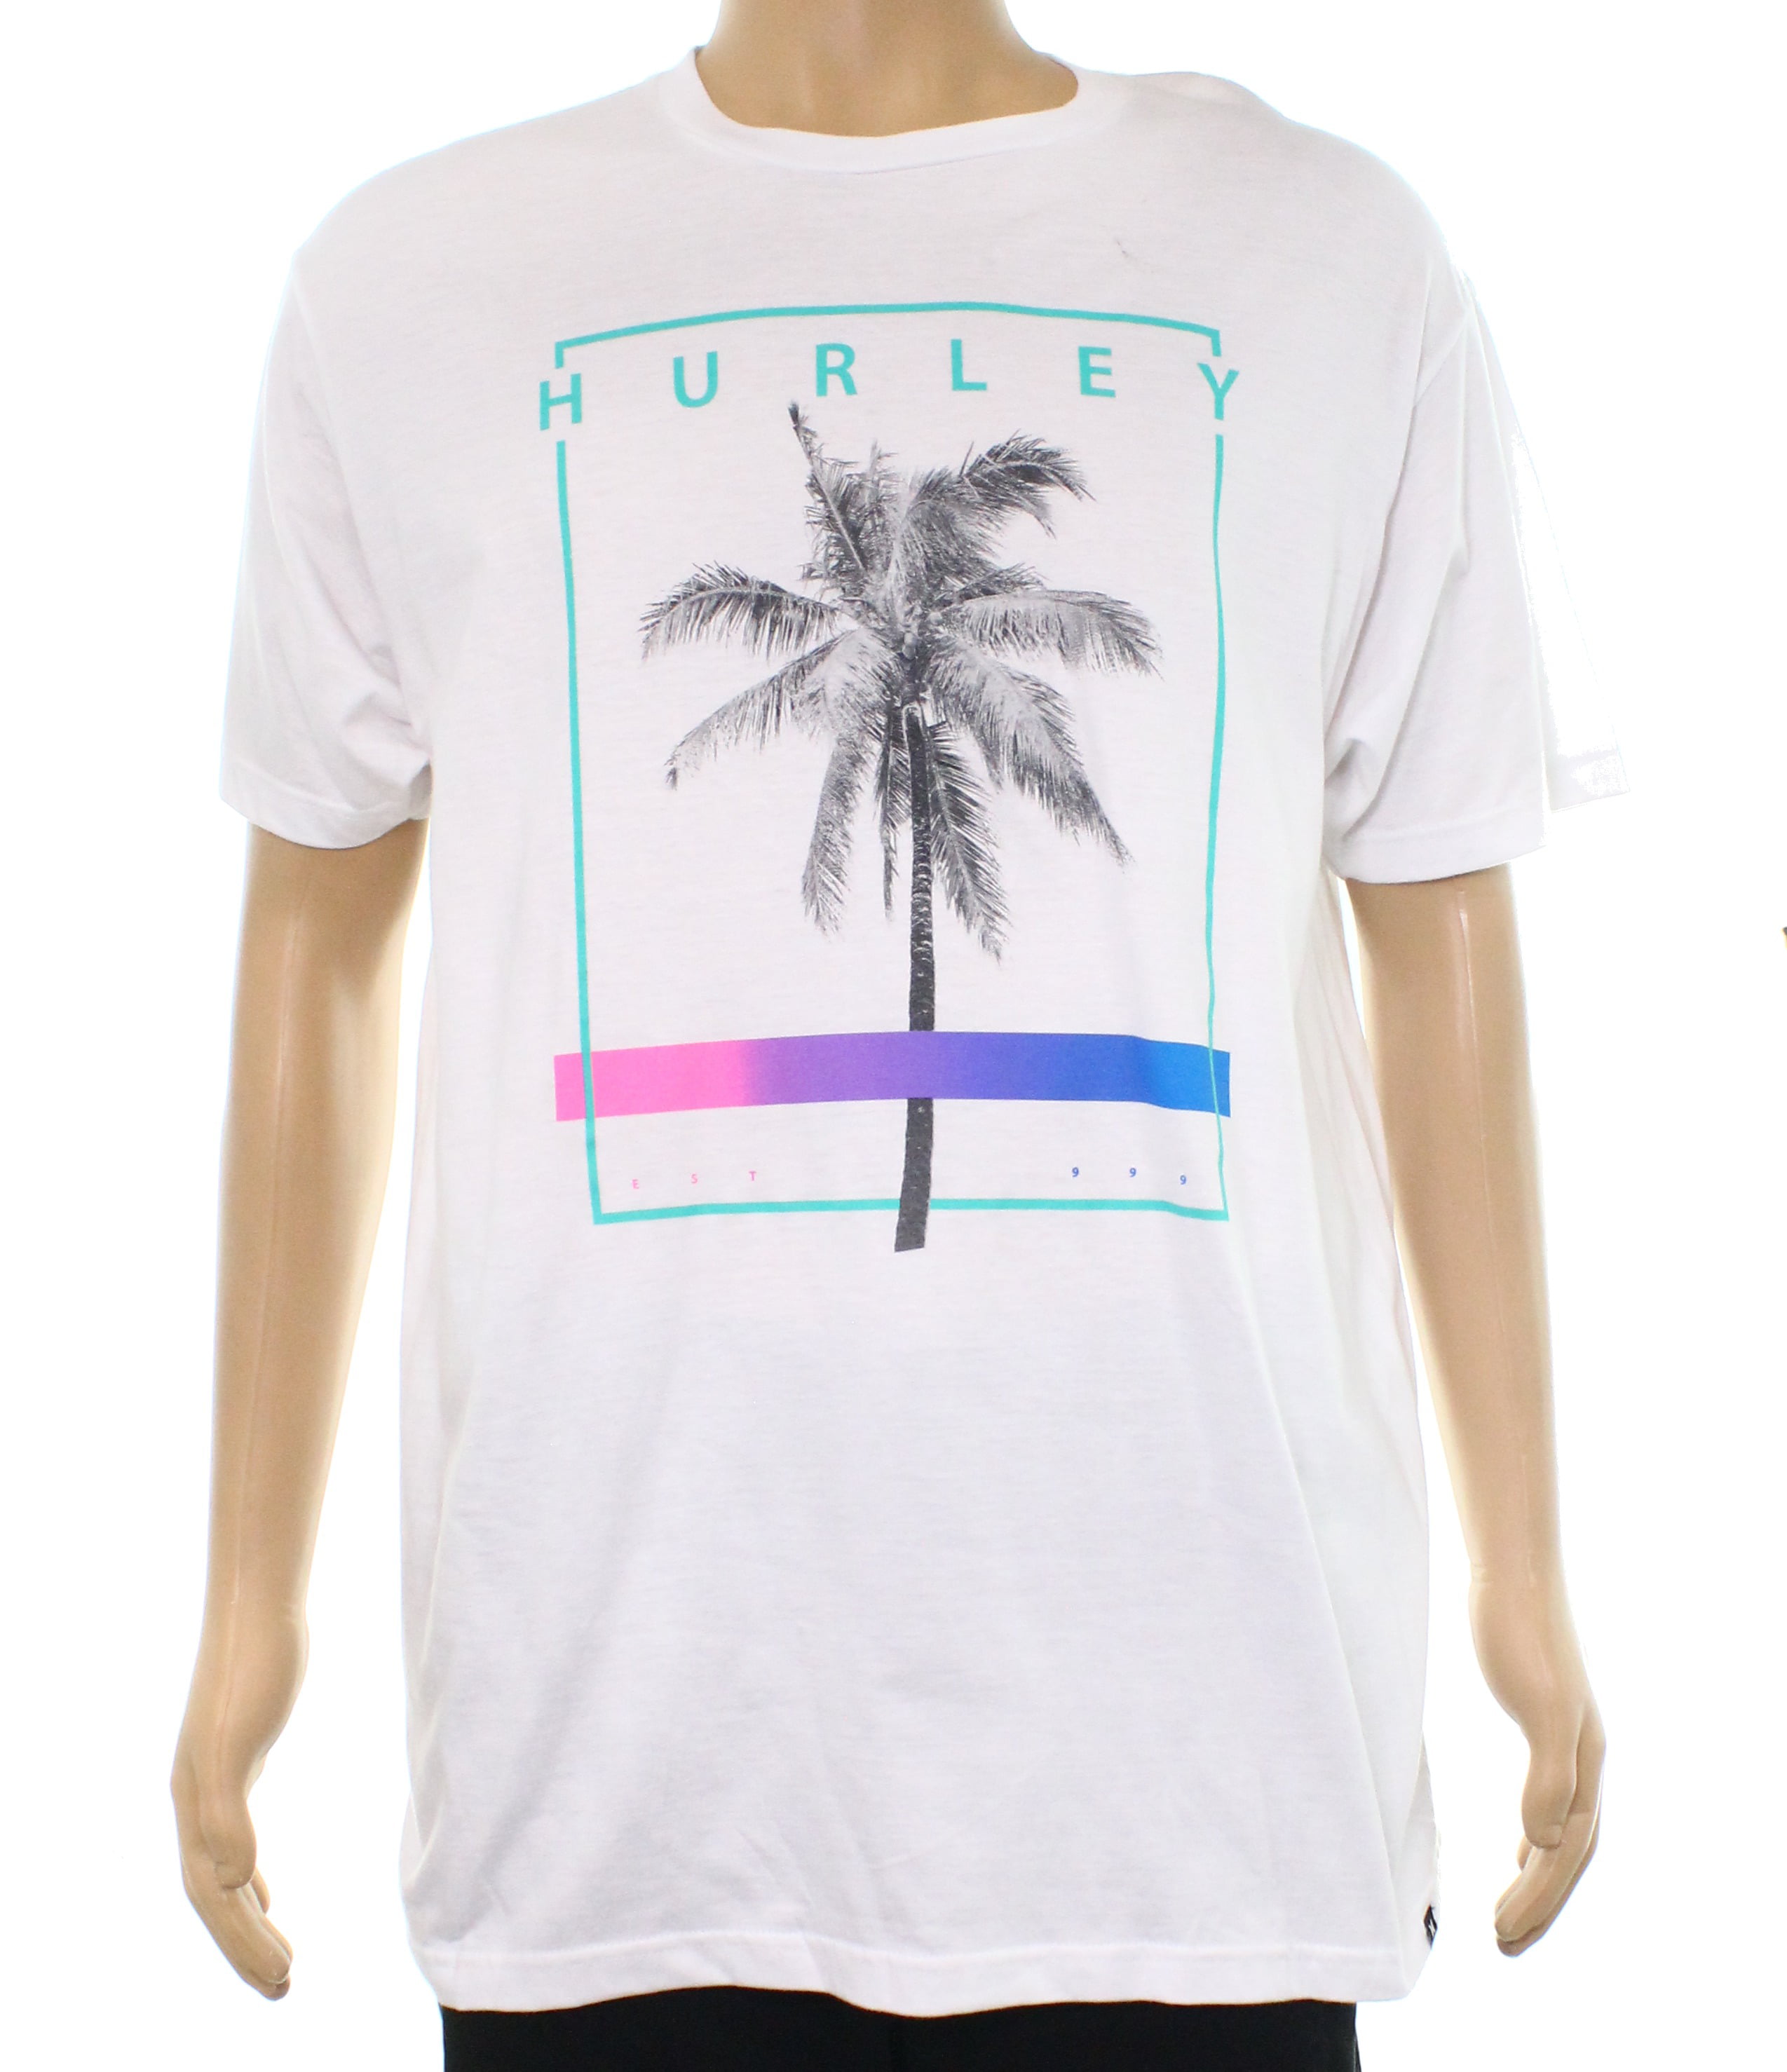 Hurley - Hurley NEW Bright White Mens Size XL Short Sleeve Graphic Tee